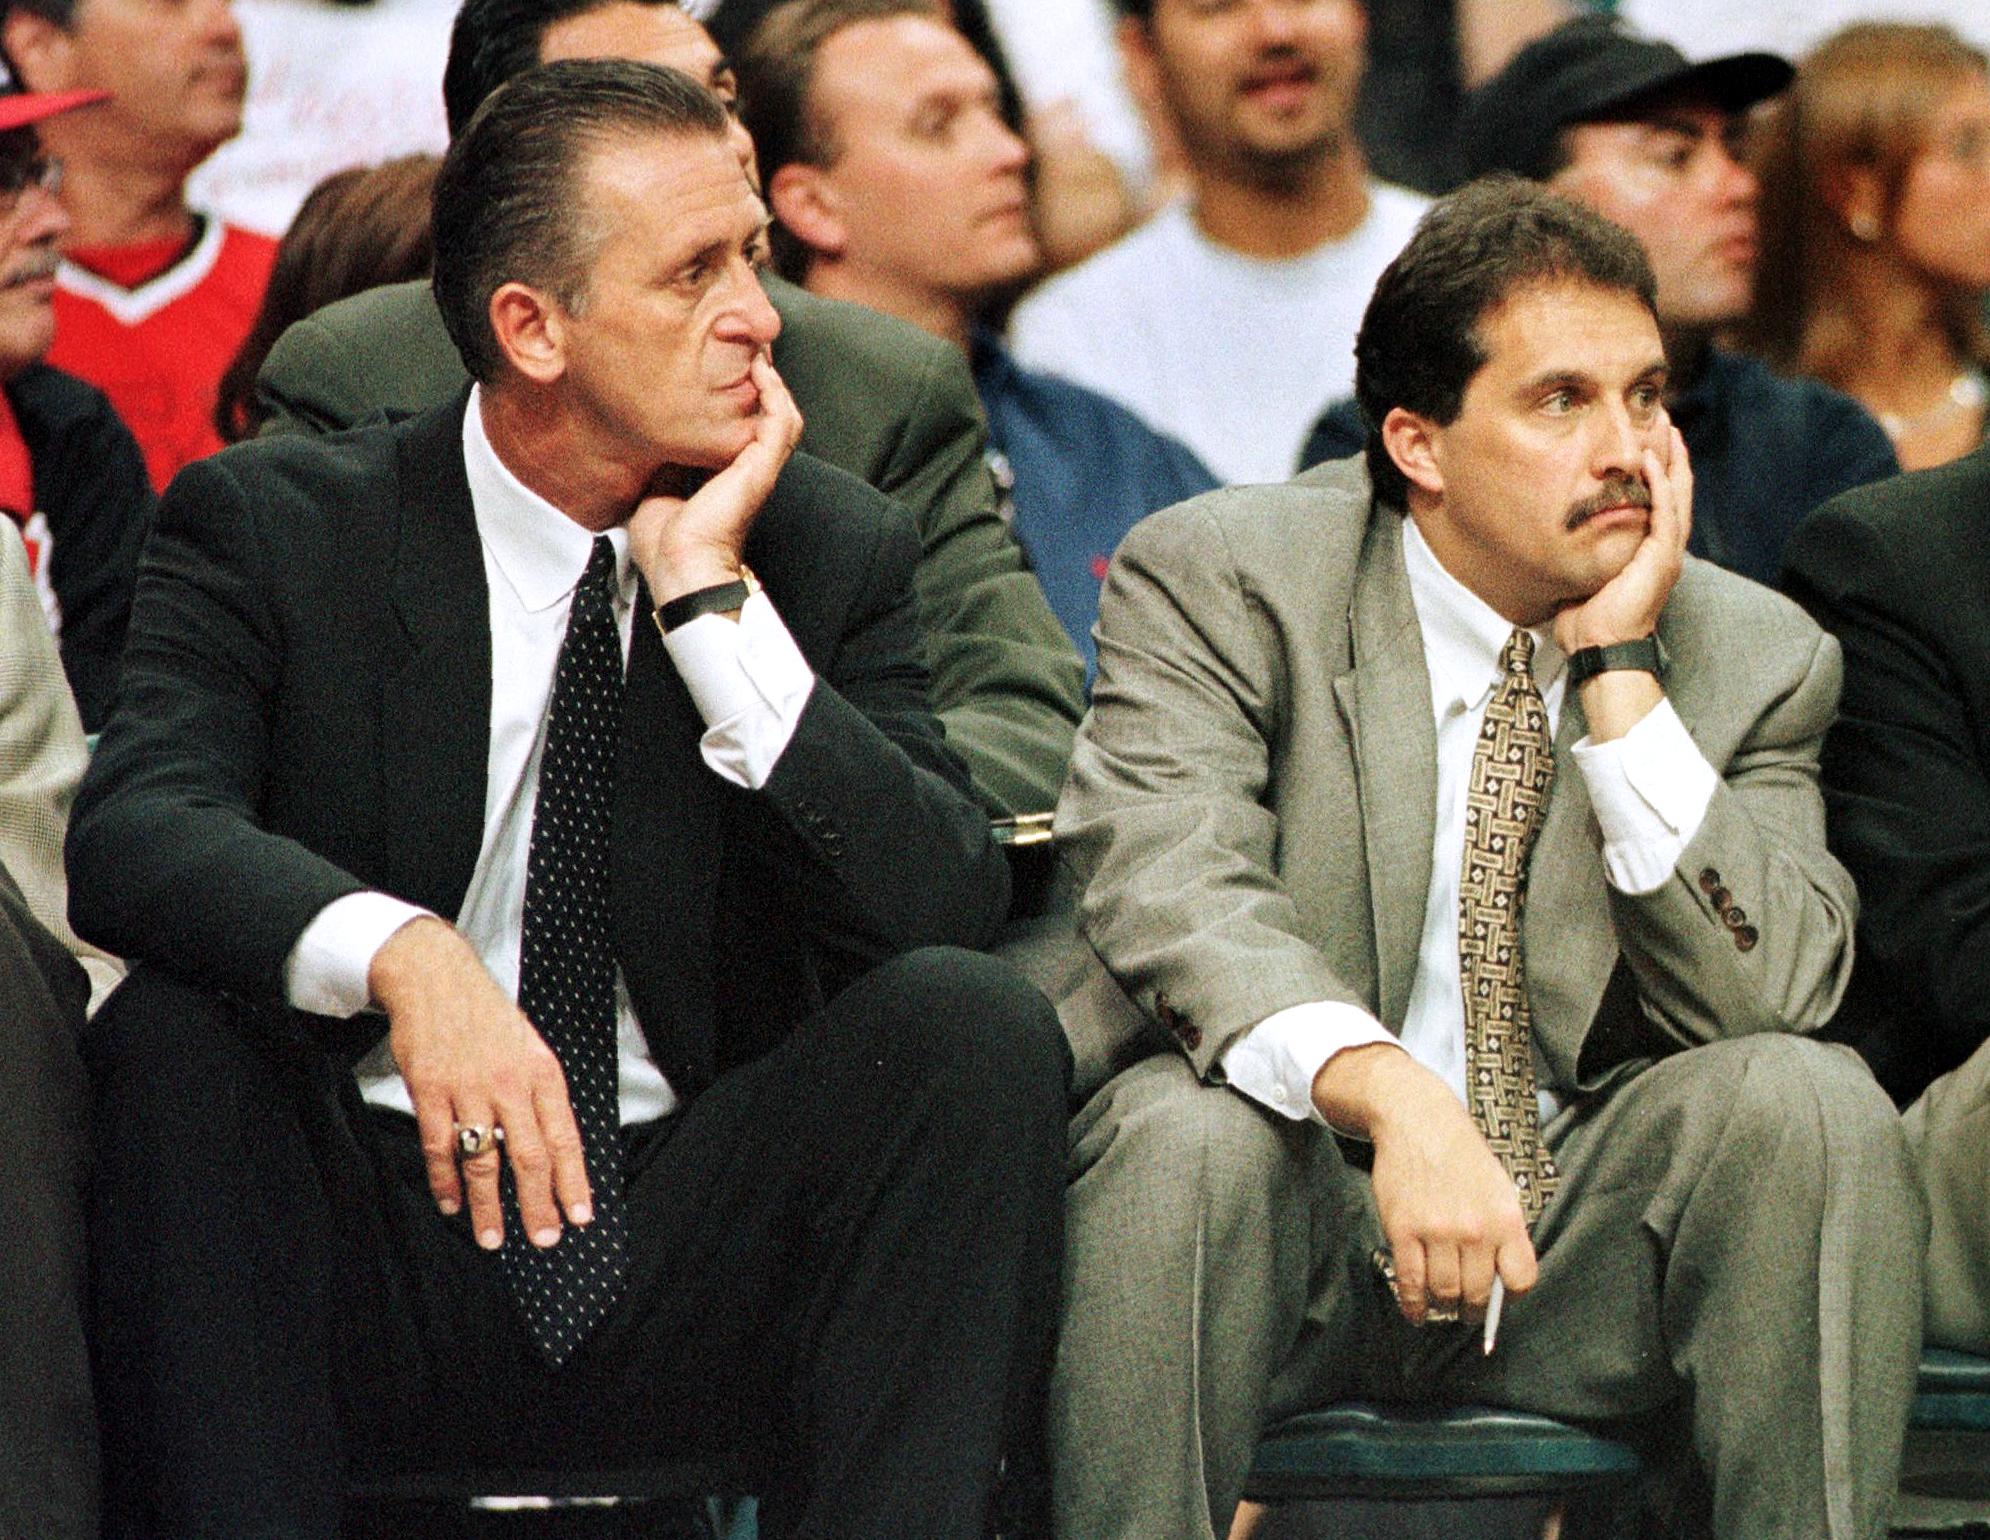 Miami Heat: For Pat Riley, Team Success Always Trumps Player Loyalty